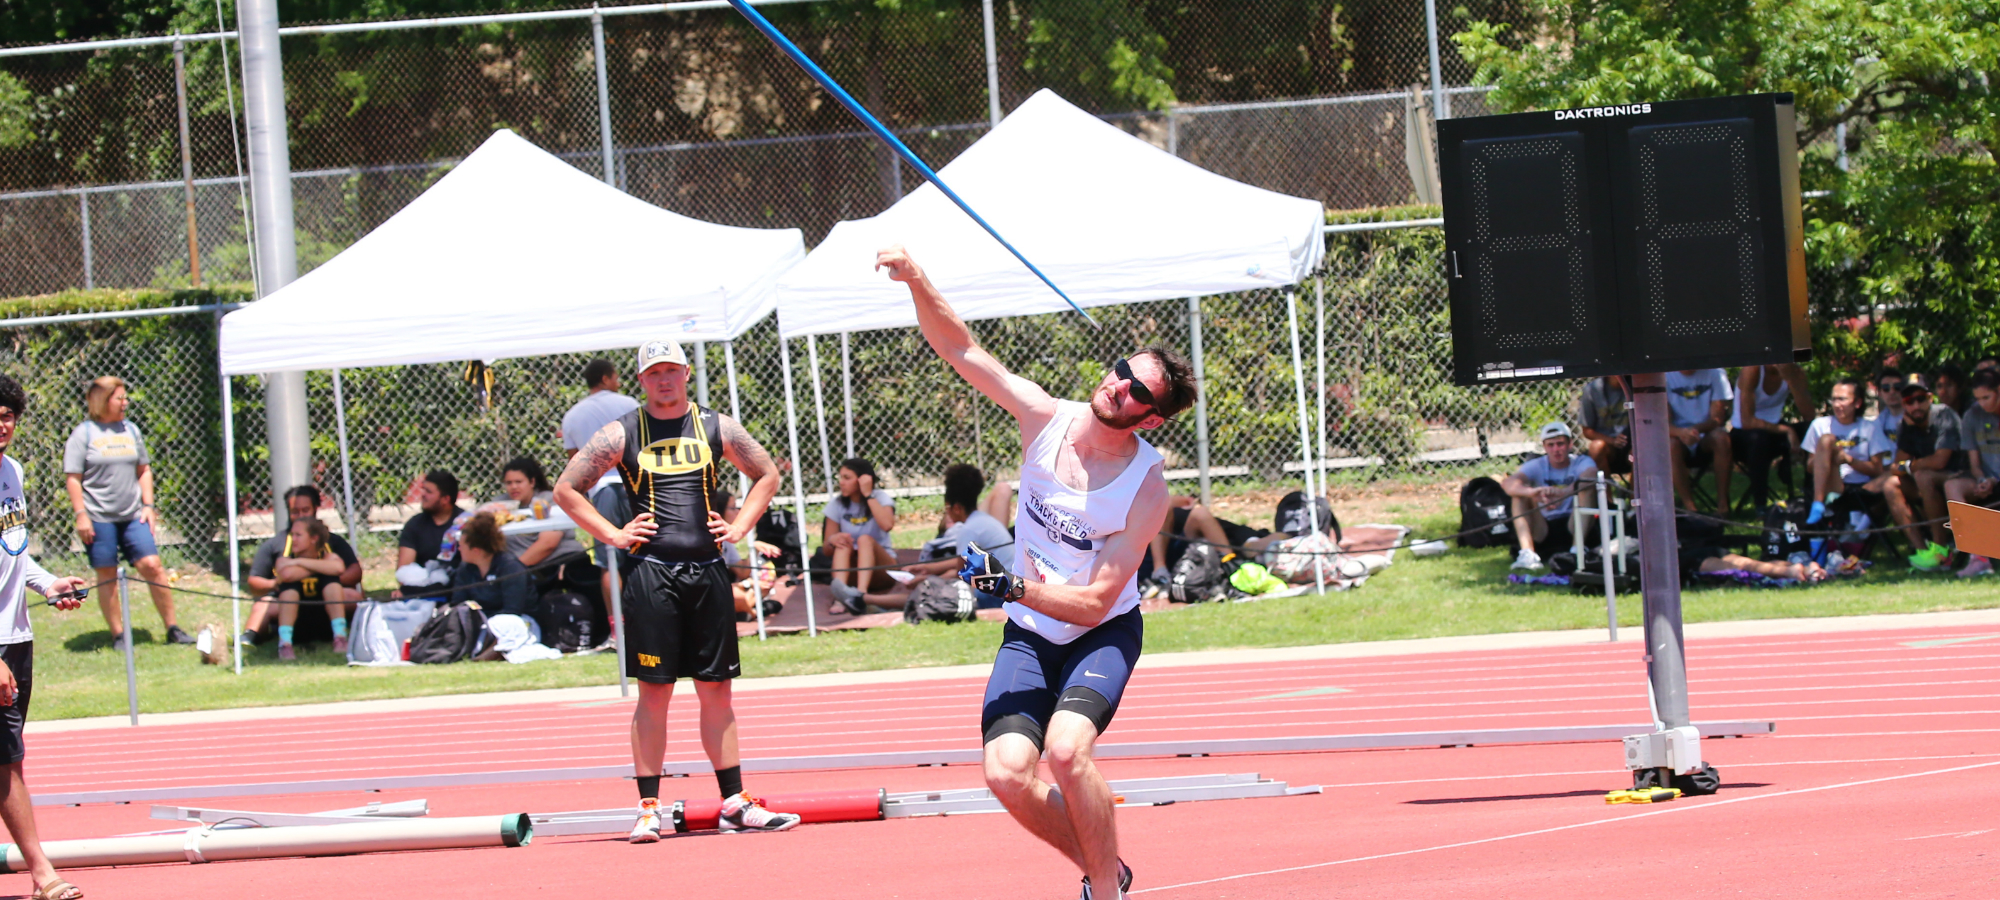 McGuirk Grabs Bronze in Men's Javelin to Lead Crusaders on Day One of SCAC Championships